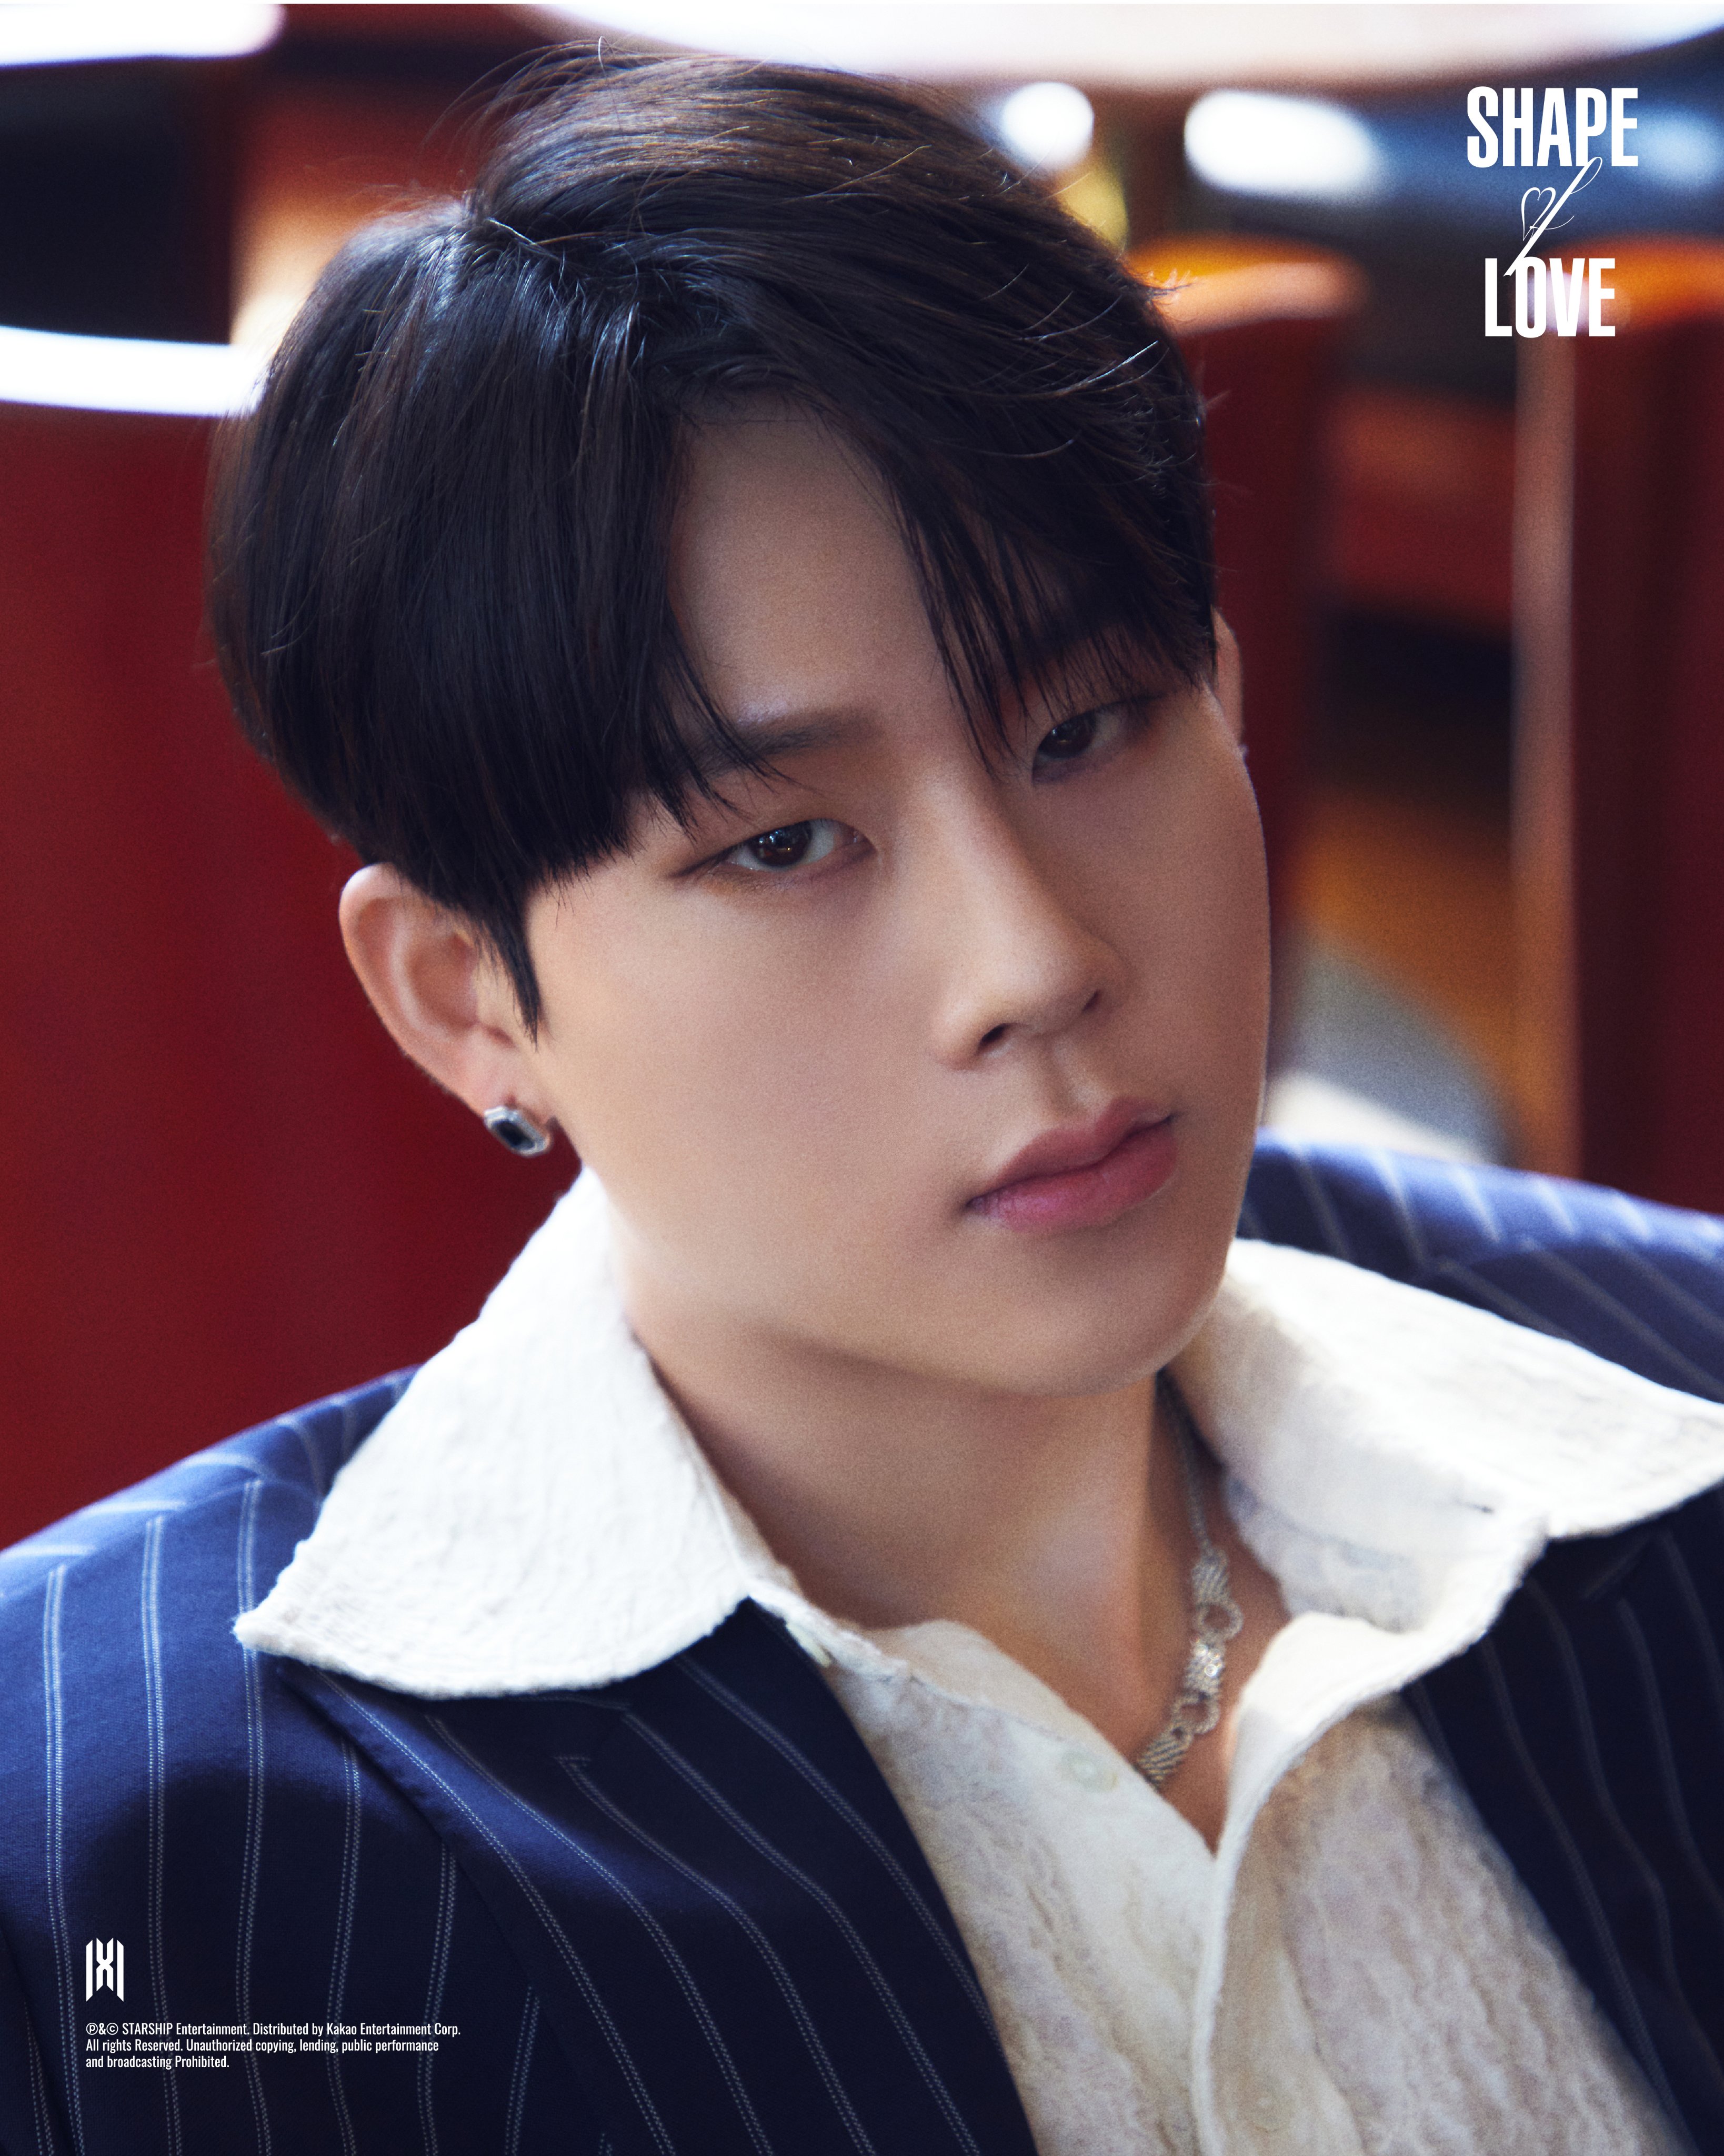 MONSTA X reveal 'everything version' of 'Shape of Love' teaser images